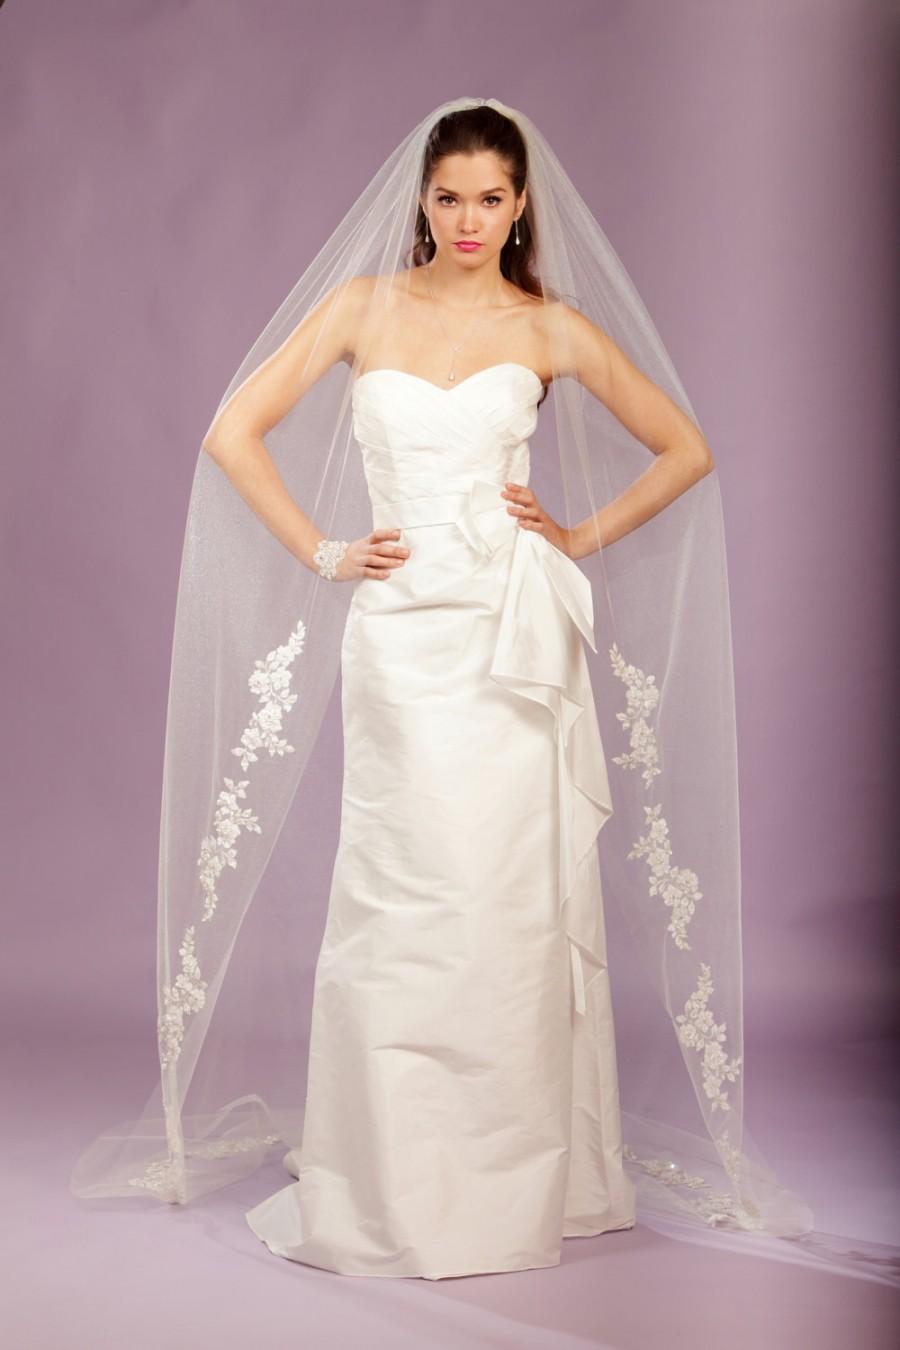 Mariage - Wedding Veil -Cathedral Veil, FRENCH Appliques Adorned with Swarovski Crystals, Embroidery, and Sequins - made to order